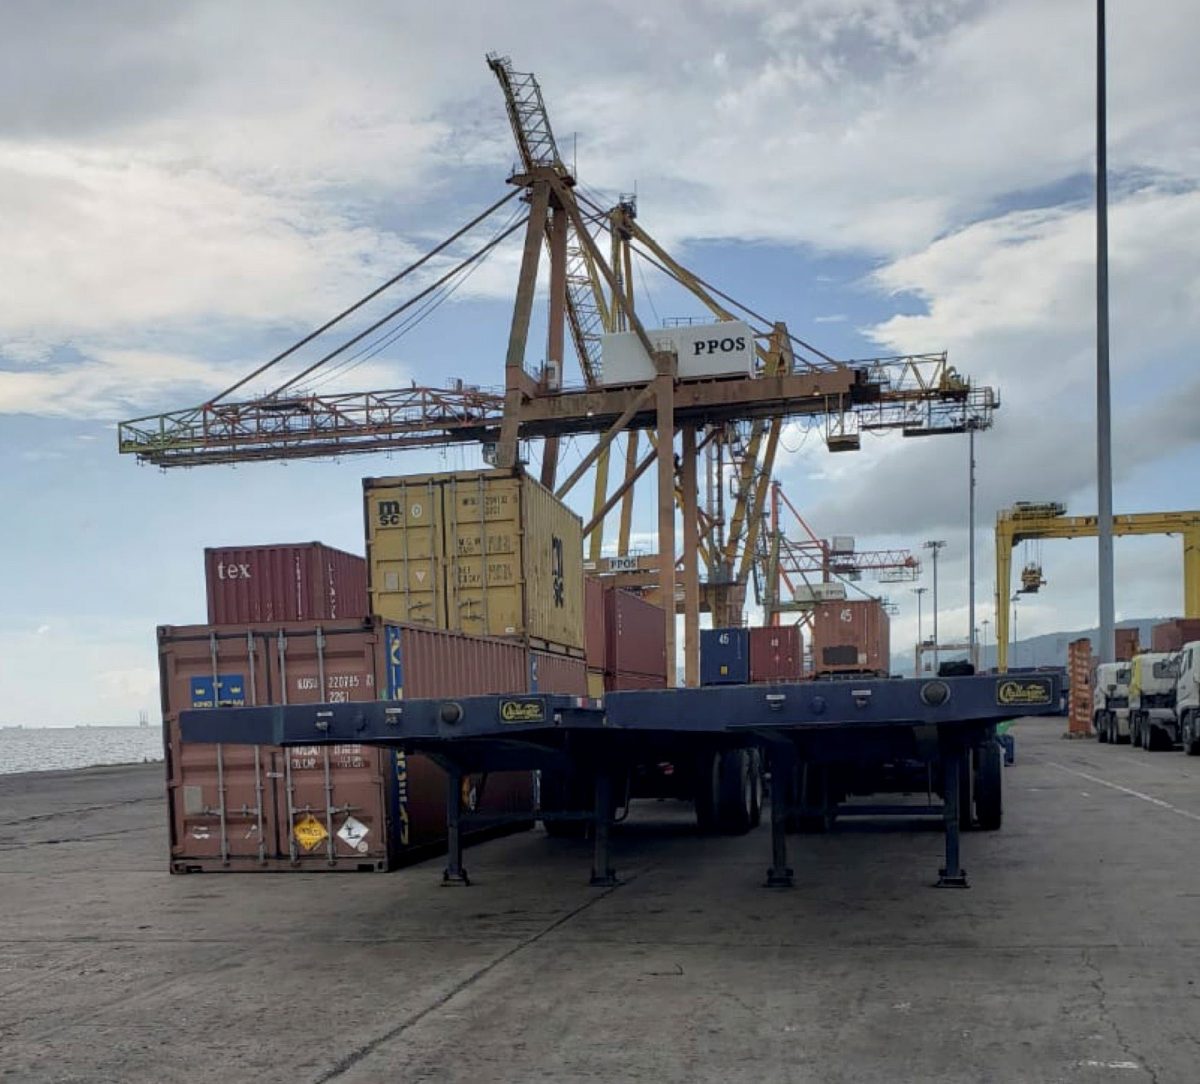 Two of the four unregistered flat-bed trailers belonging to a well-known contractor that customs and port officials stopped from being loaded onto a vessel bound for Guyana at the Port of Spain port yesterday.